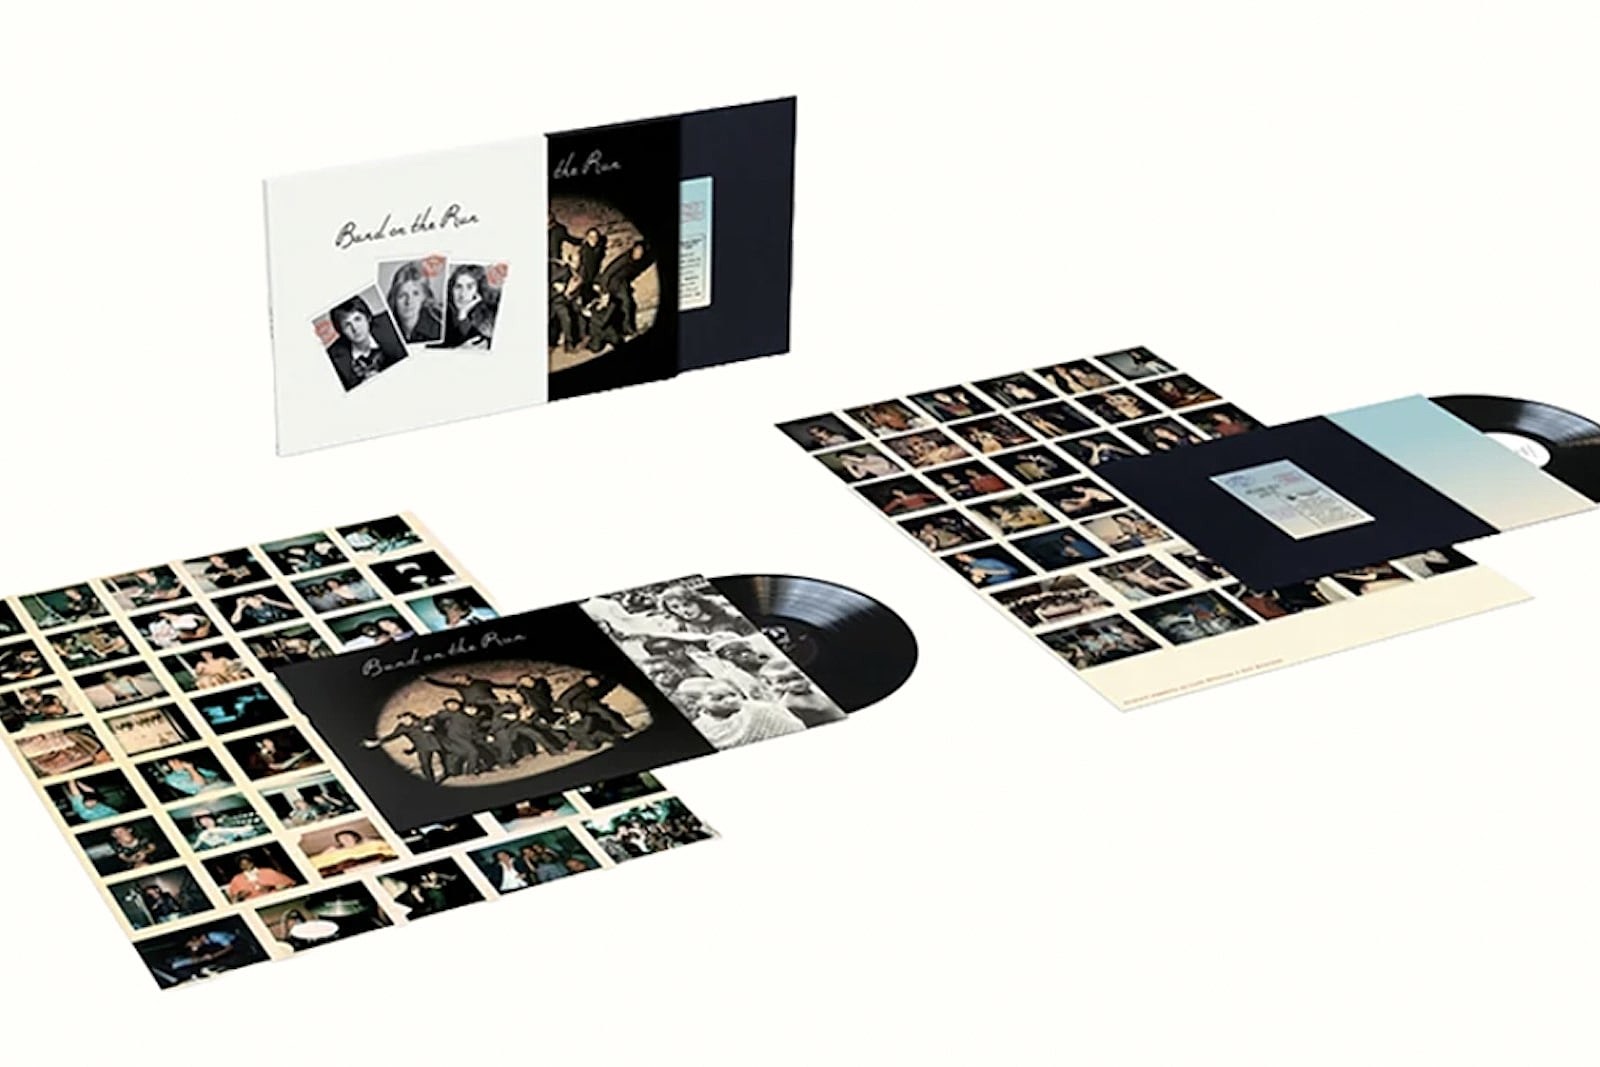 Paul McCartney to Release Expanded Edition of 'Band on the Run'